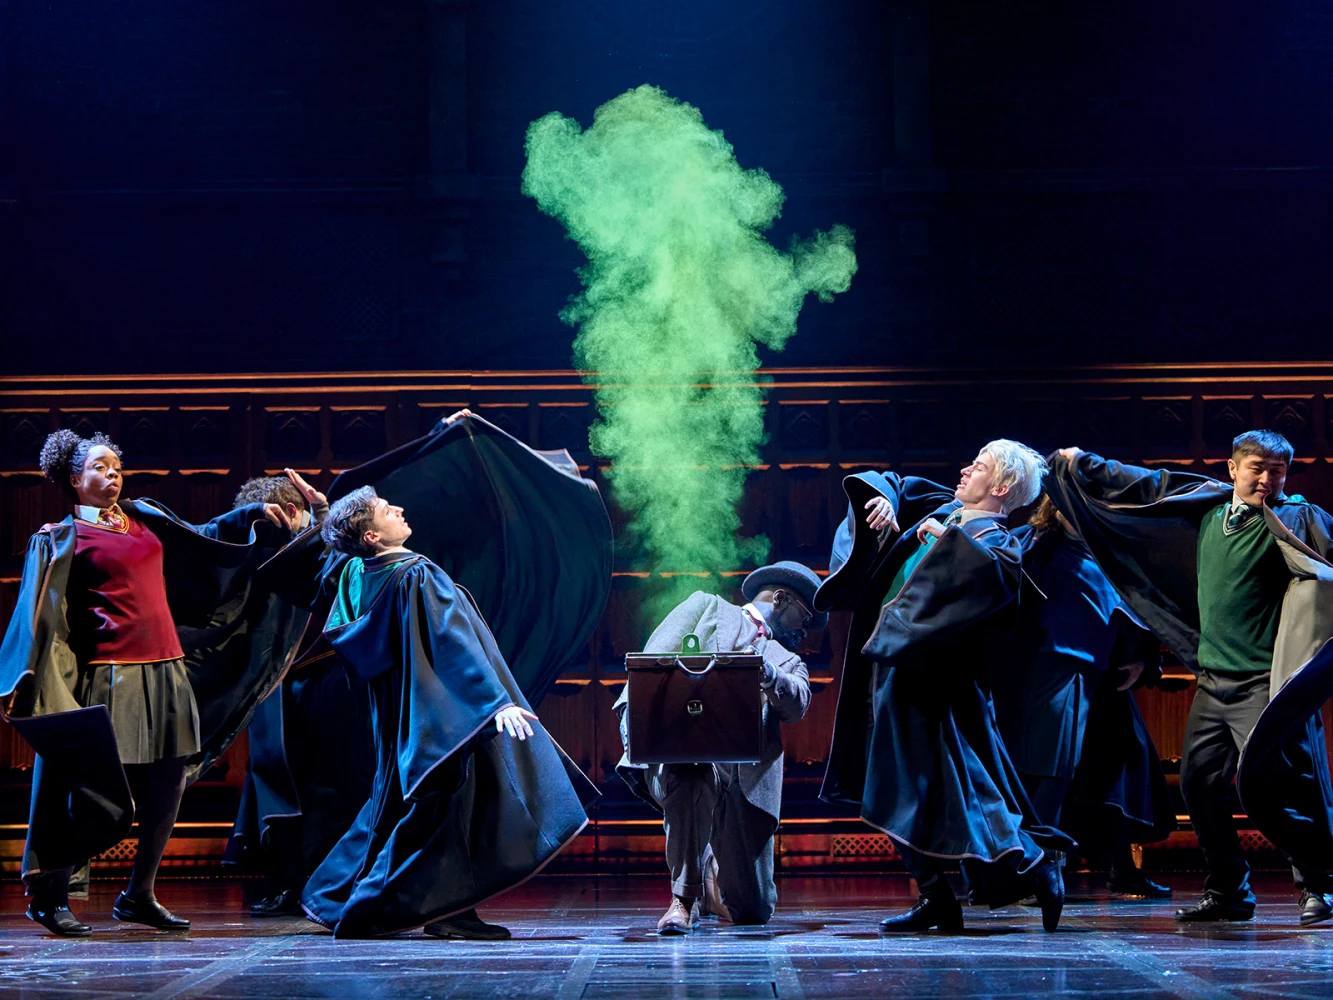 Harry Potter And The Cursed Child: Both Parts: What to expect - 2